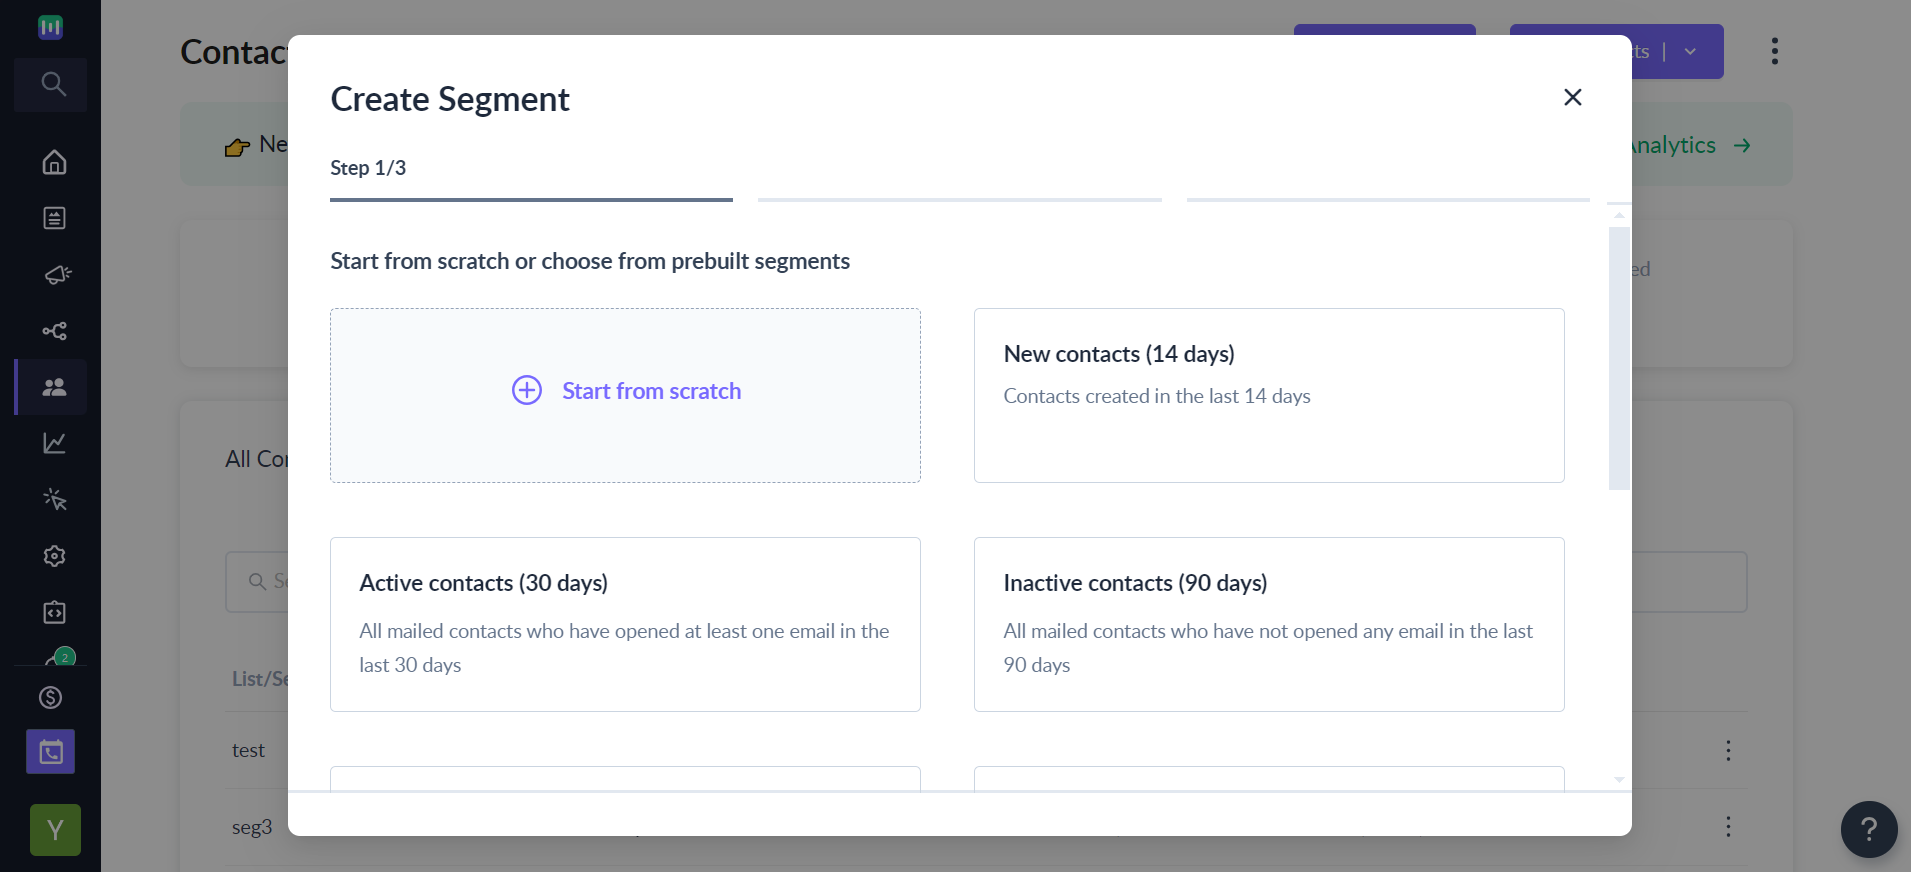 What are the pre-built segments and how can they be utilized to segment your contacts?